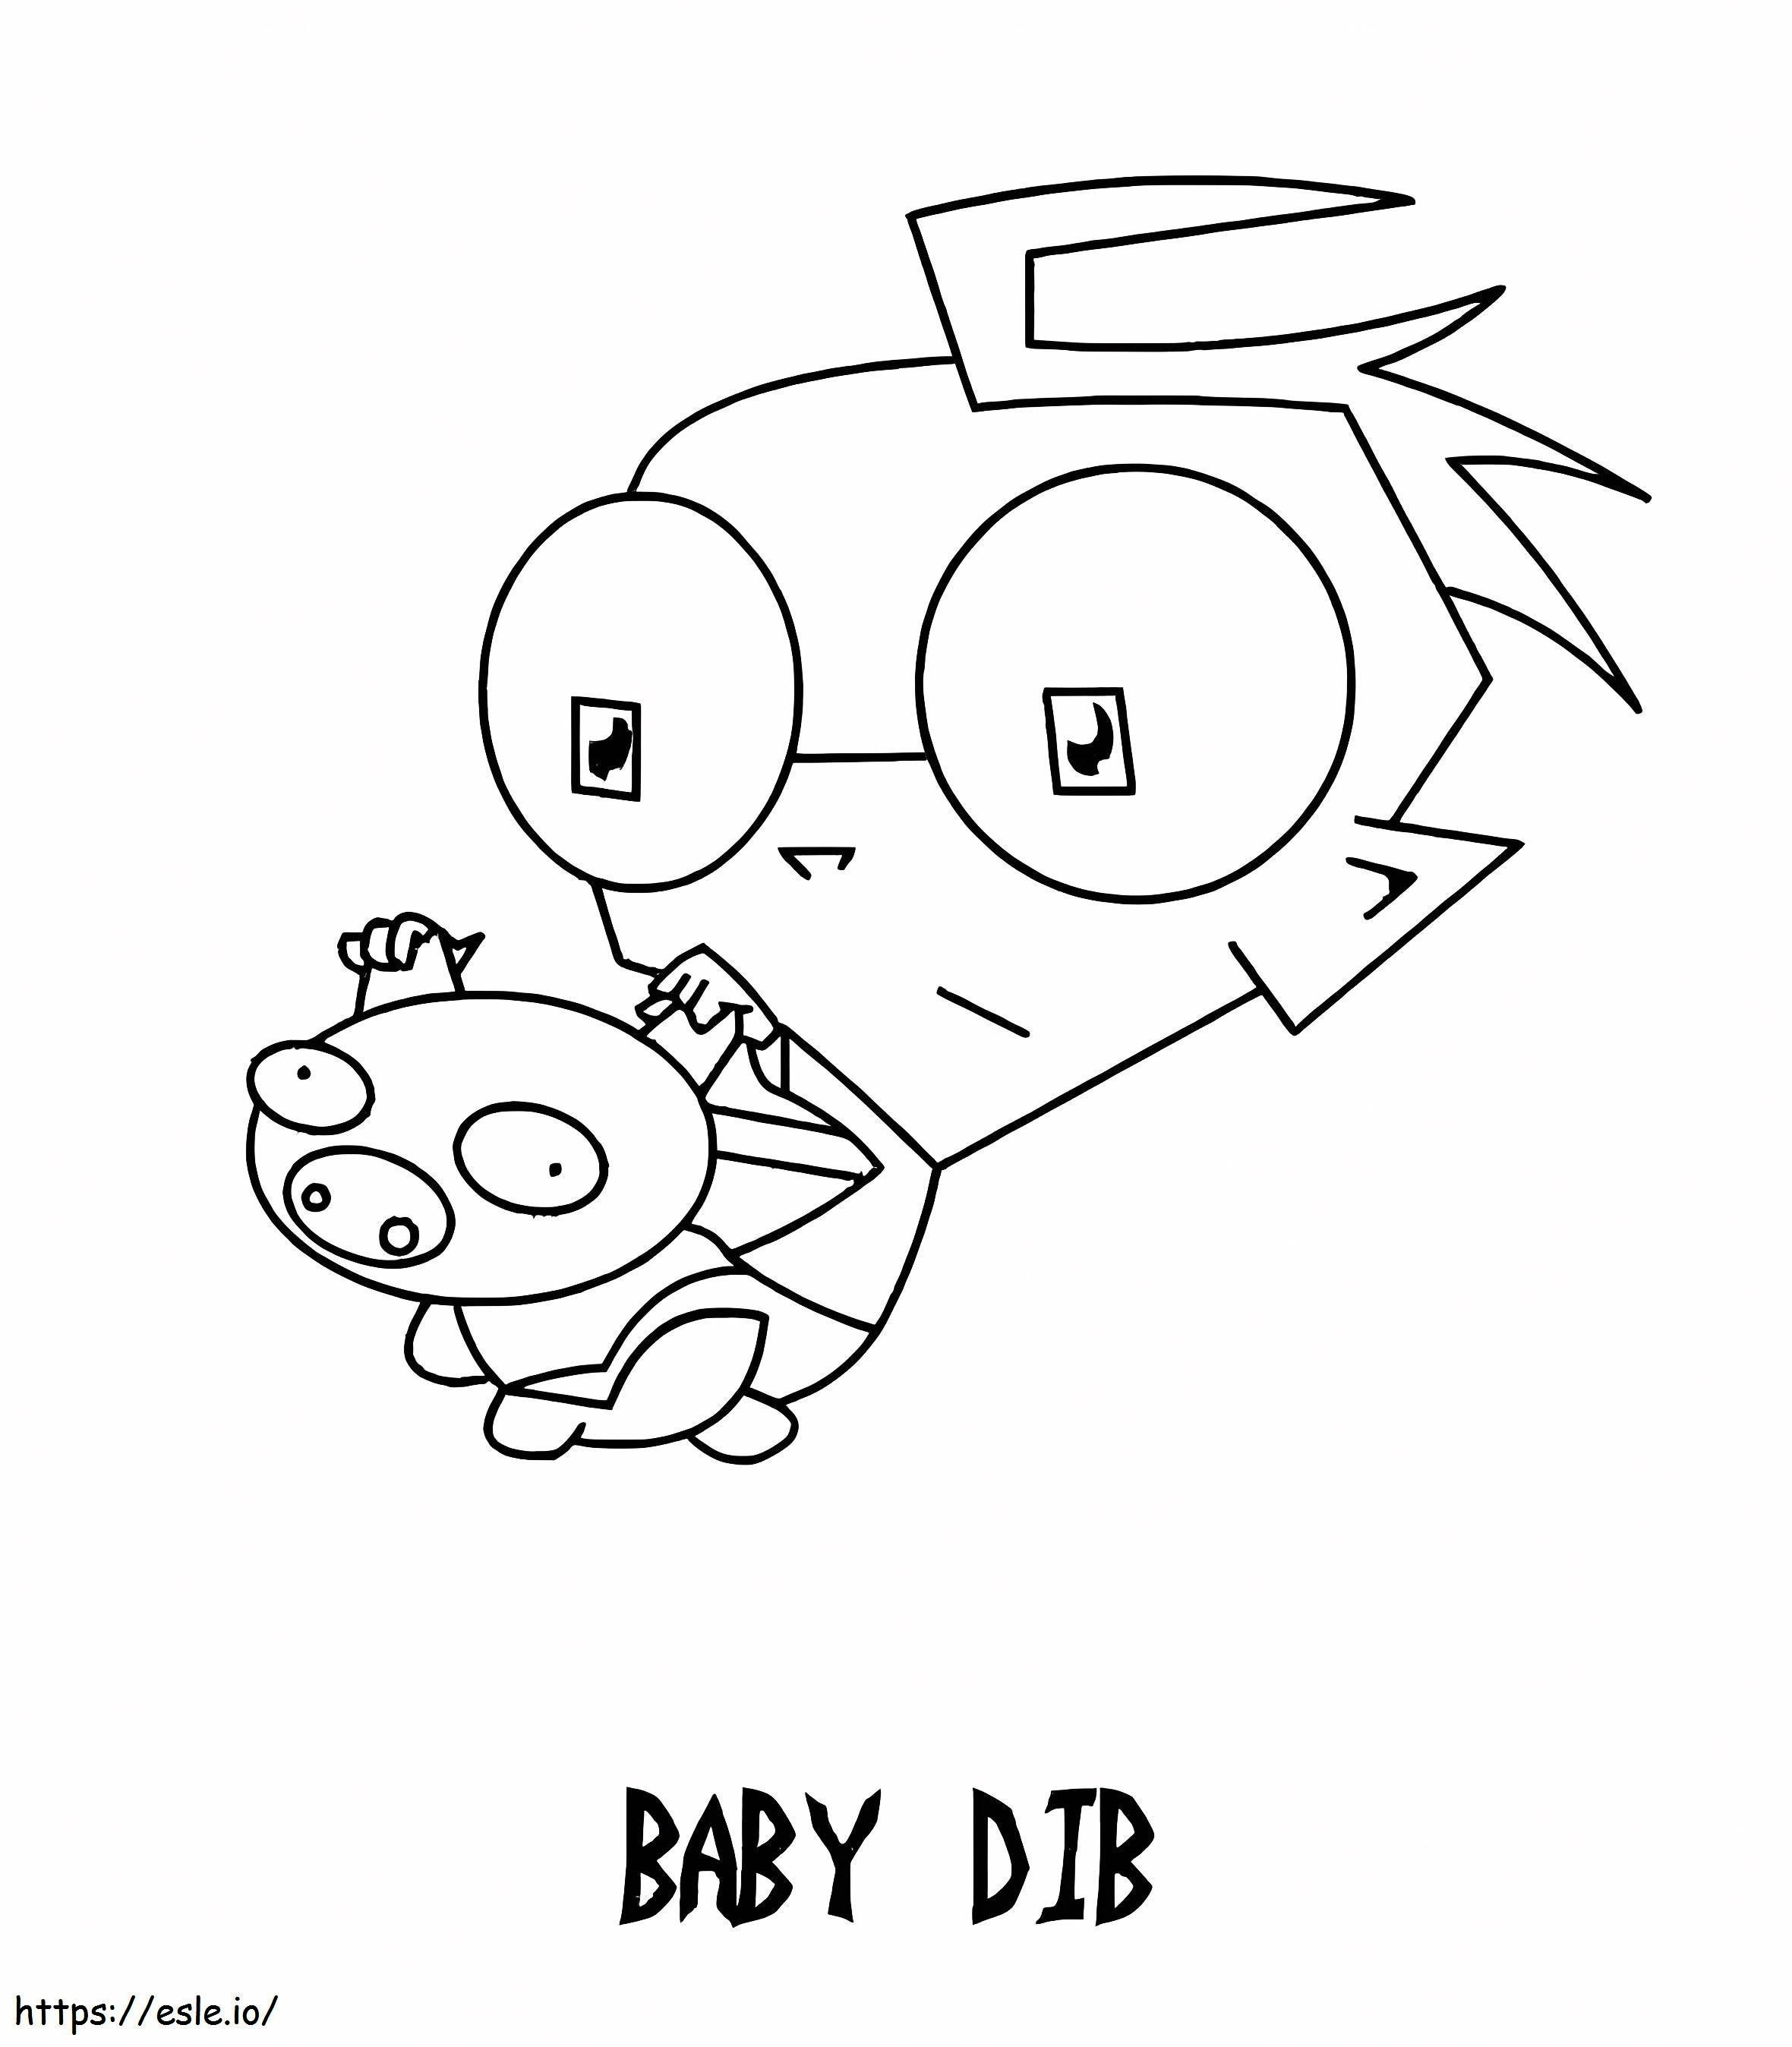 Baby Dib From Invader Zim coloring page